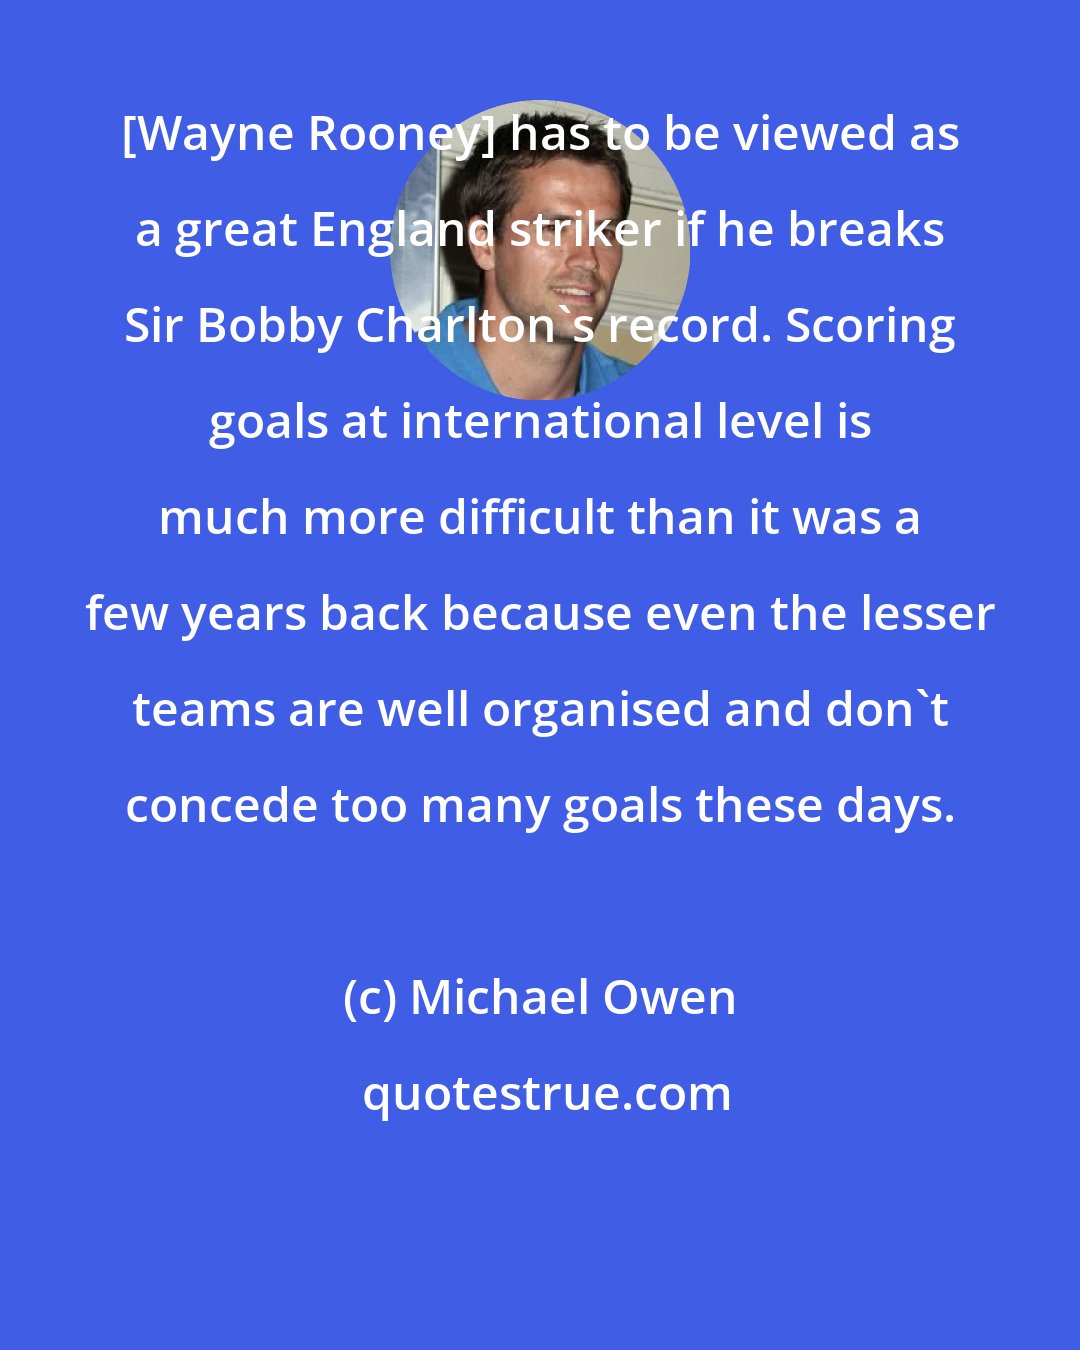 Michael Owen: [Wayne Rooney] has to be viewed as a great England striker if he breaks Sir Bobby Charlton's record. Scoring goals at international level is much more difficult than it was a few years back because even the lesser teams are well organised and don't concede too many goals these days.